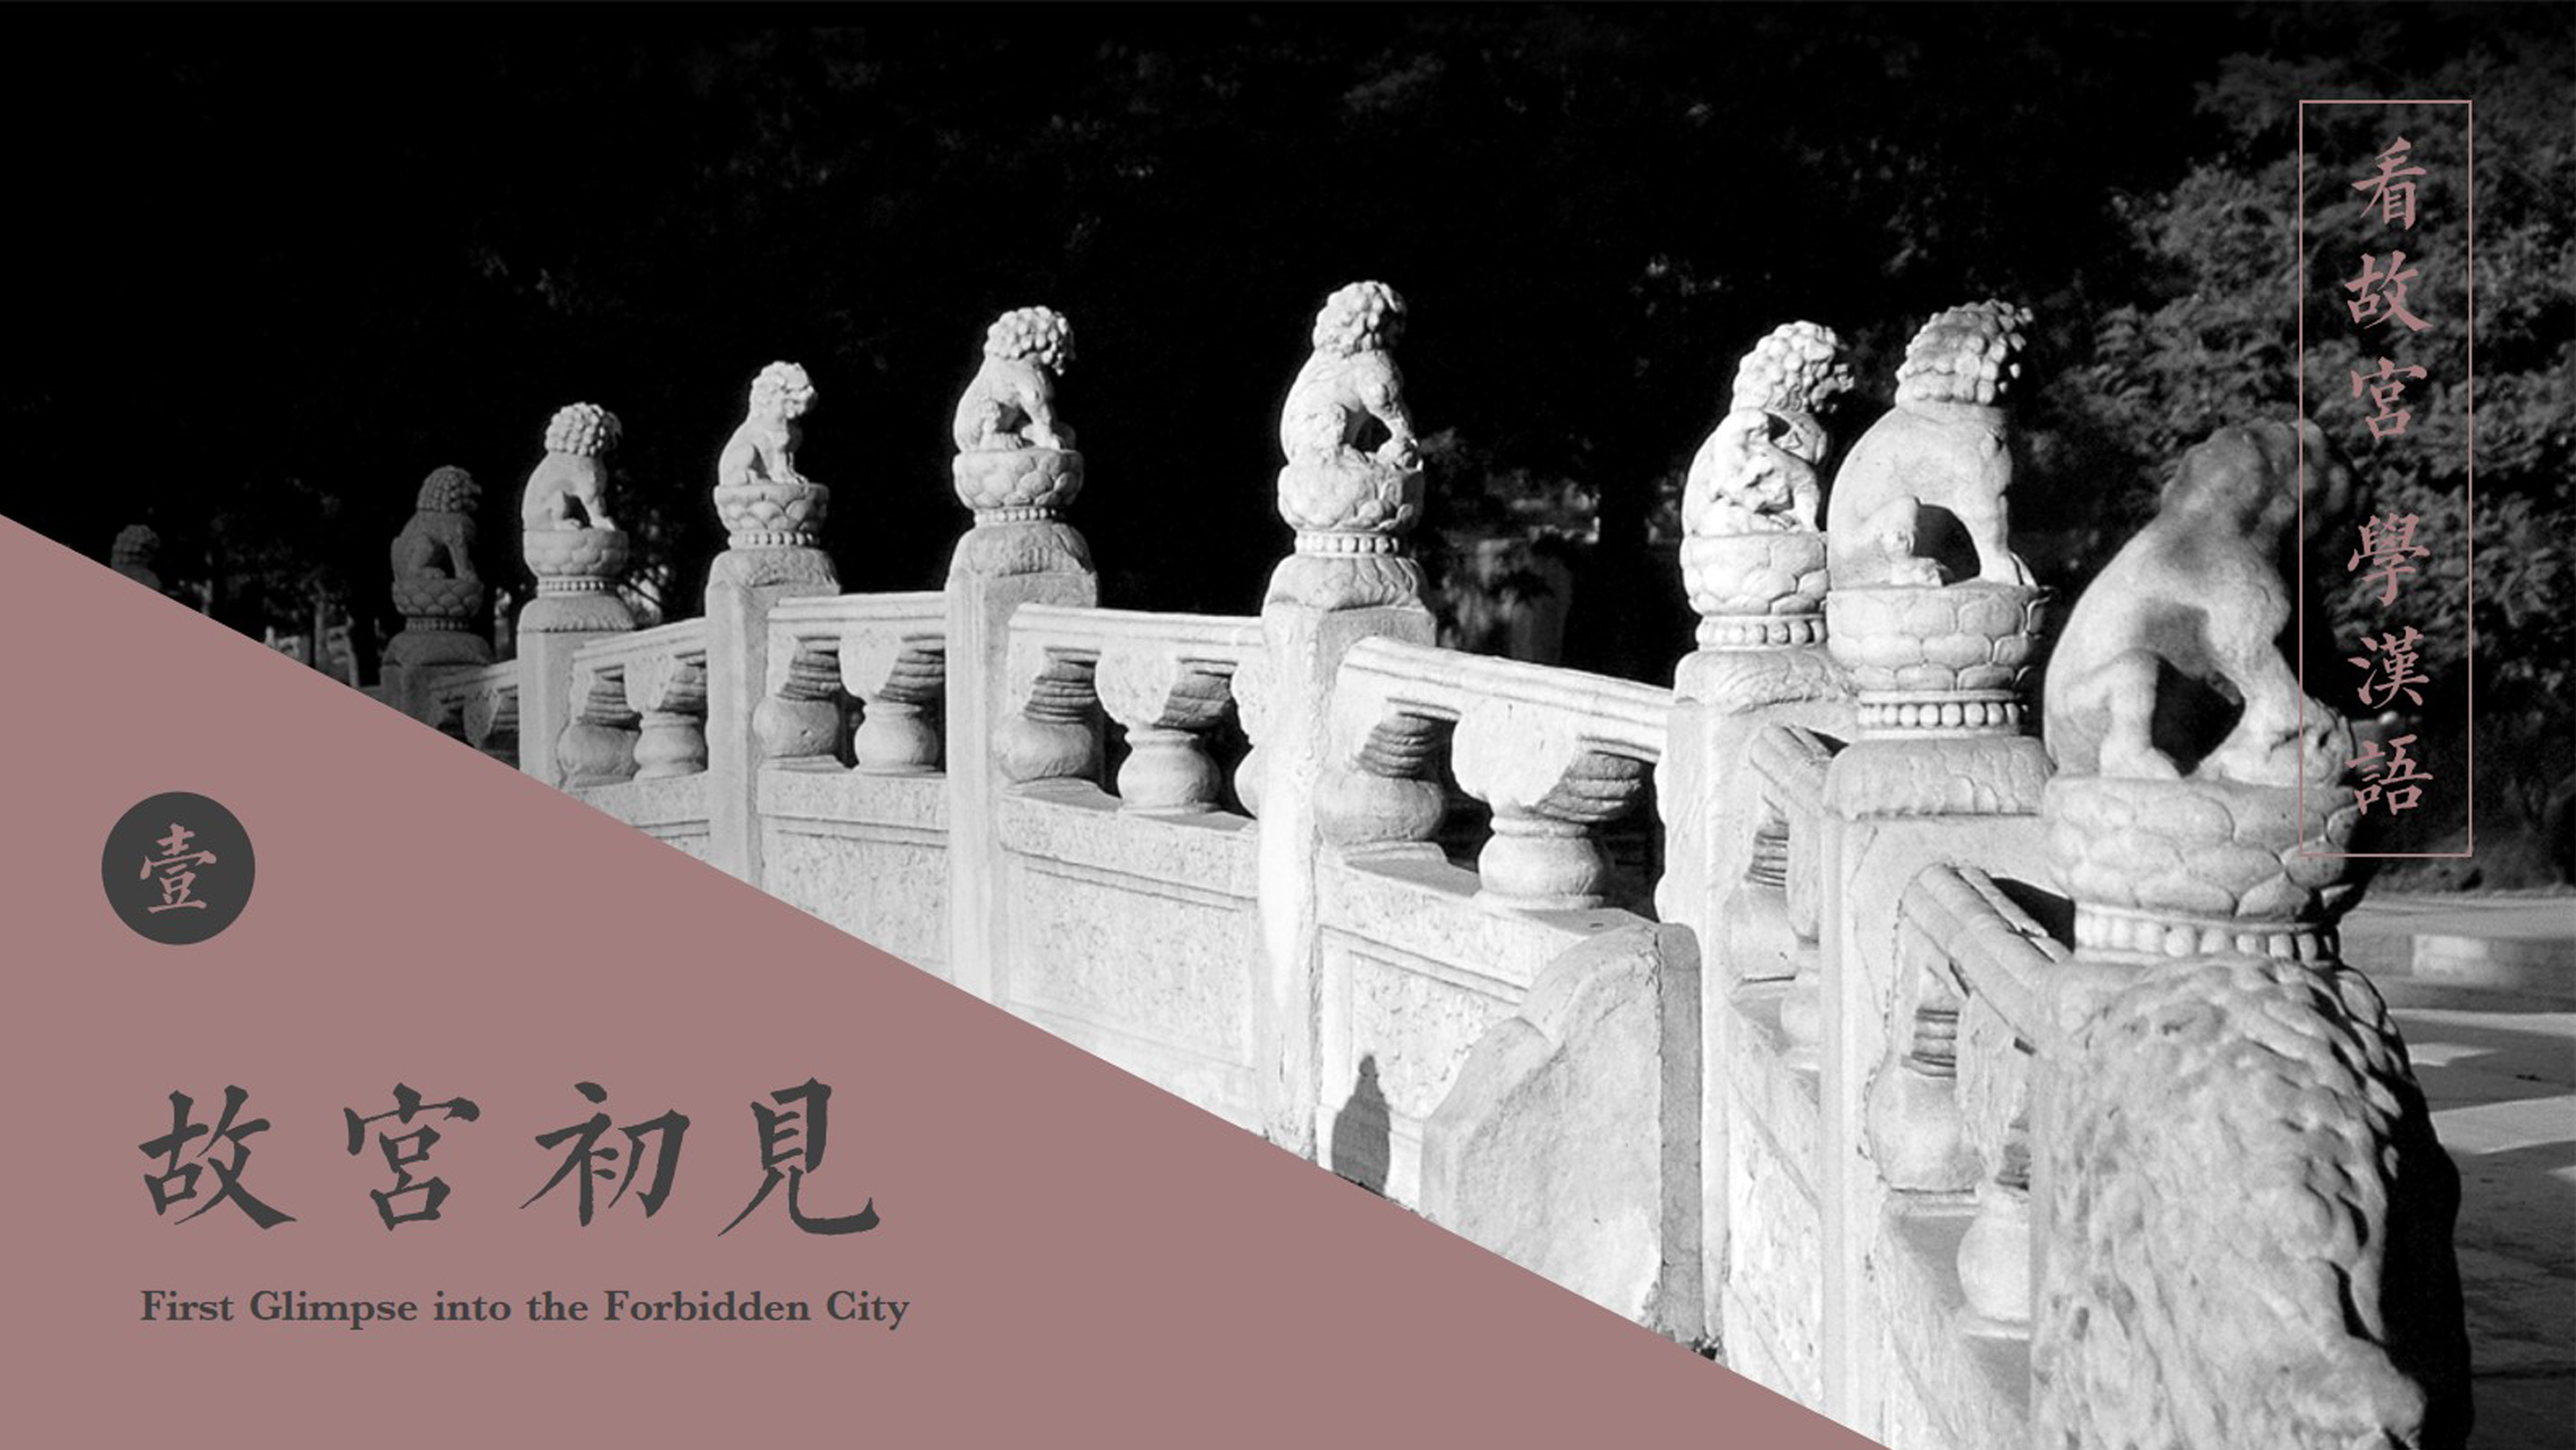 Lecture 1 “First Glimpse into the Forbidden City”